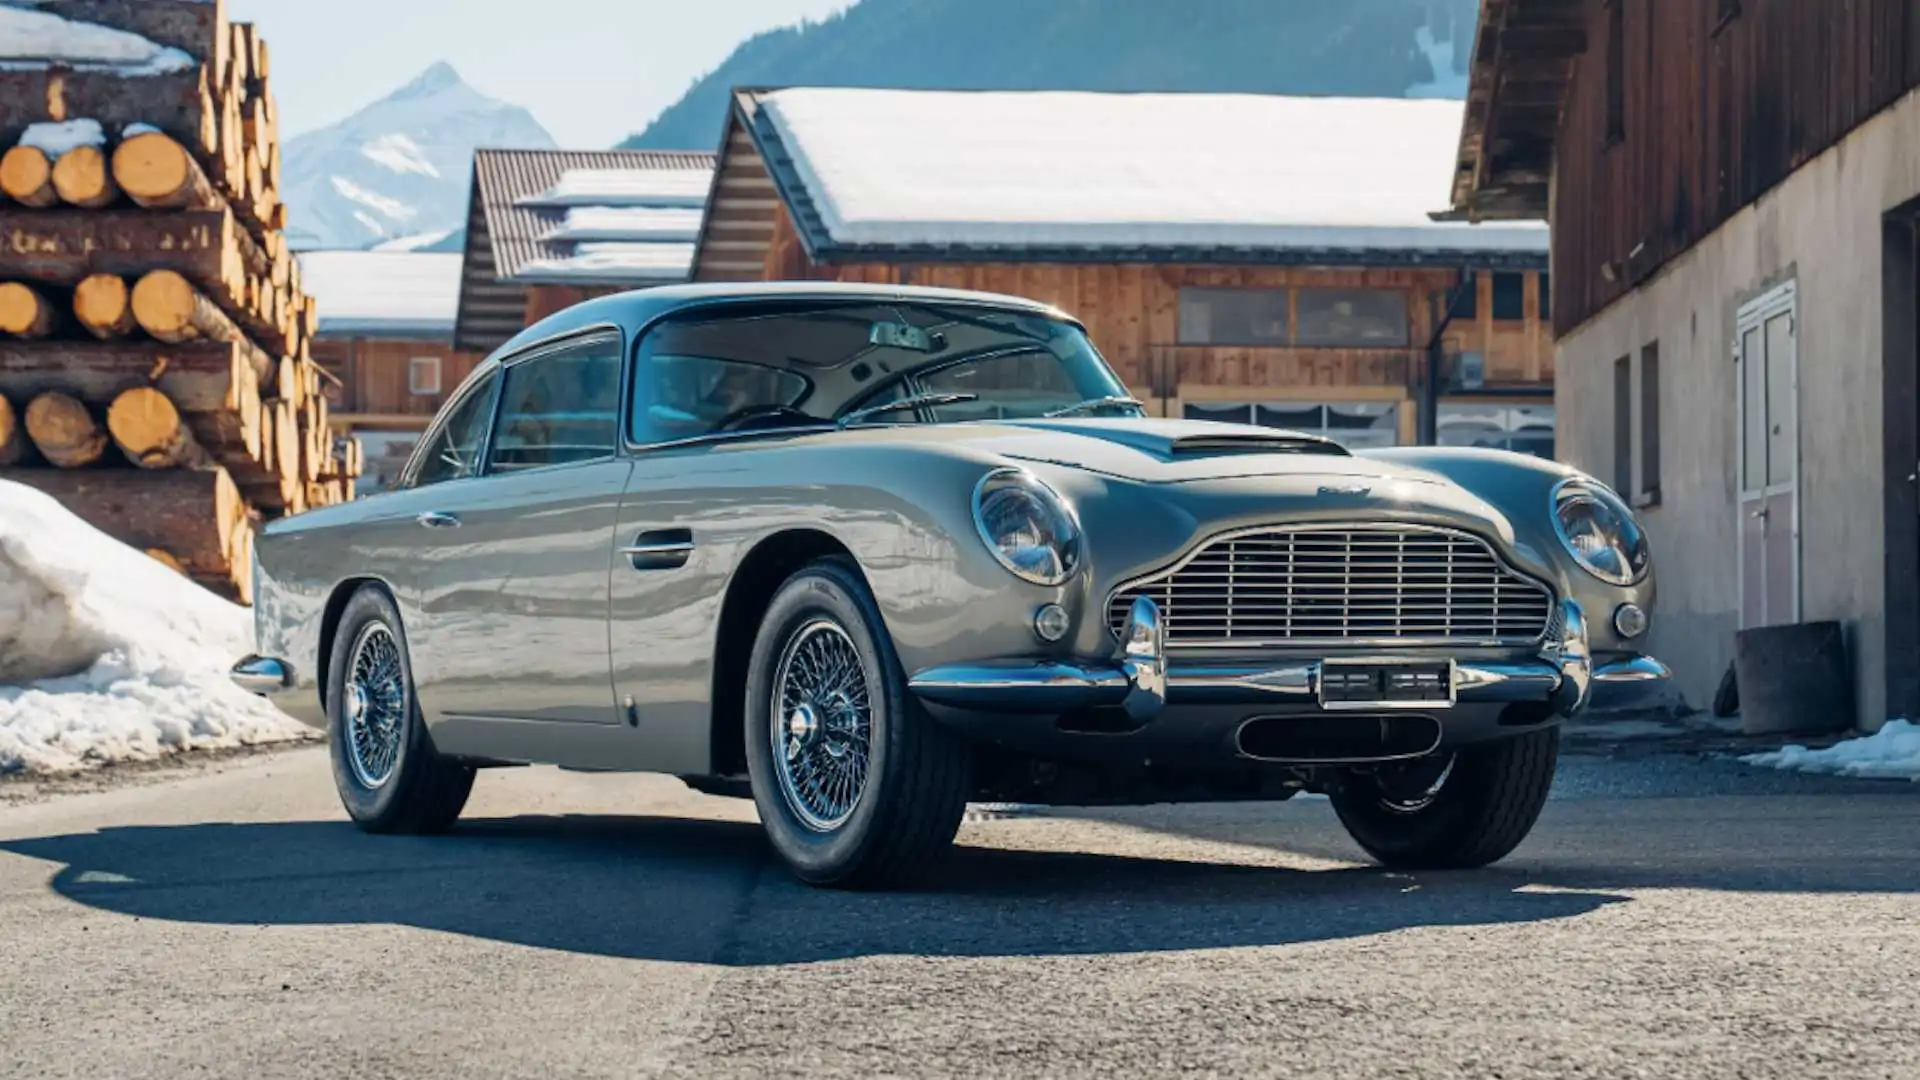 Sean Connery's 1964 Aston Martin DB5 has been sold!